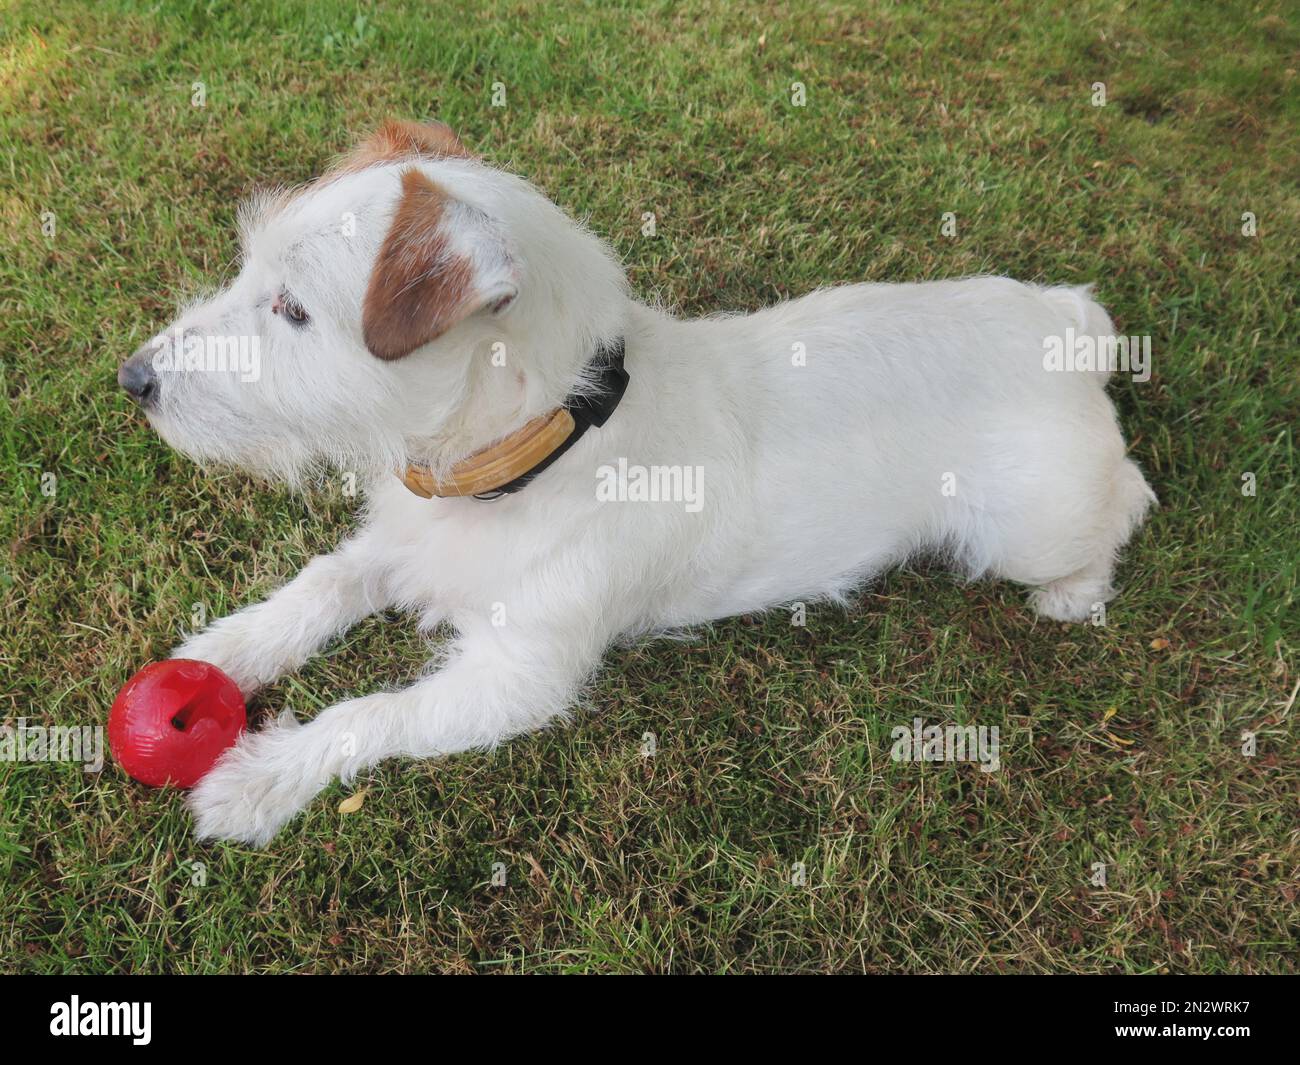 cute jack russell terrier dog with a red ball playing staring Stock Photo